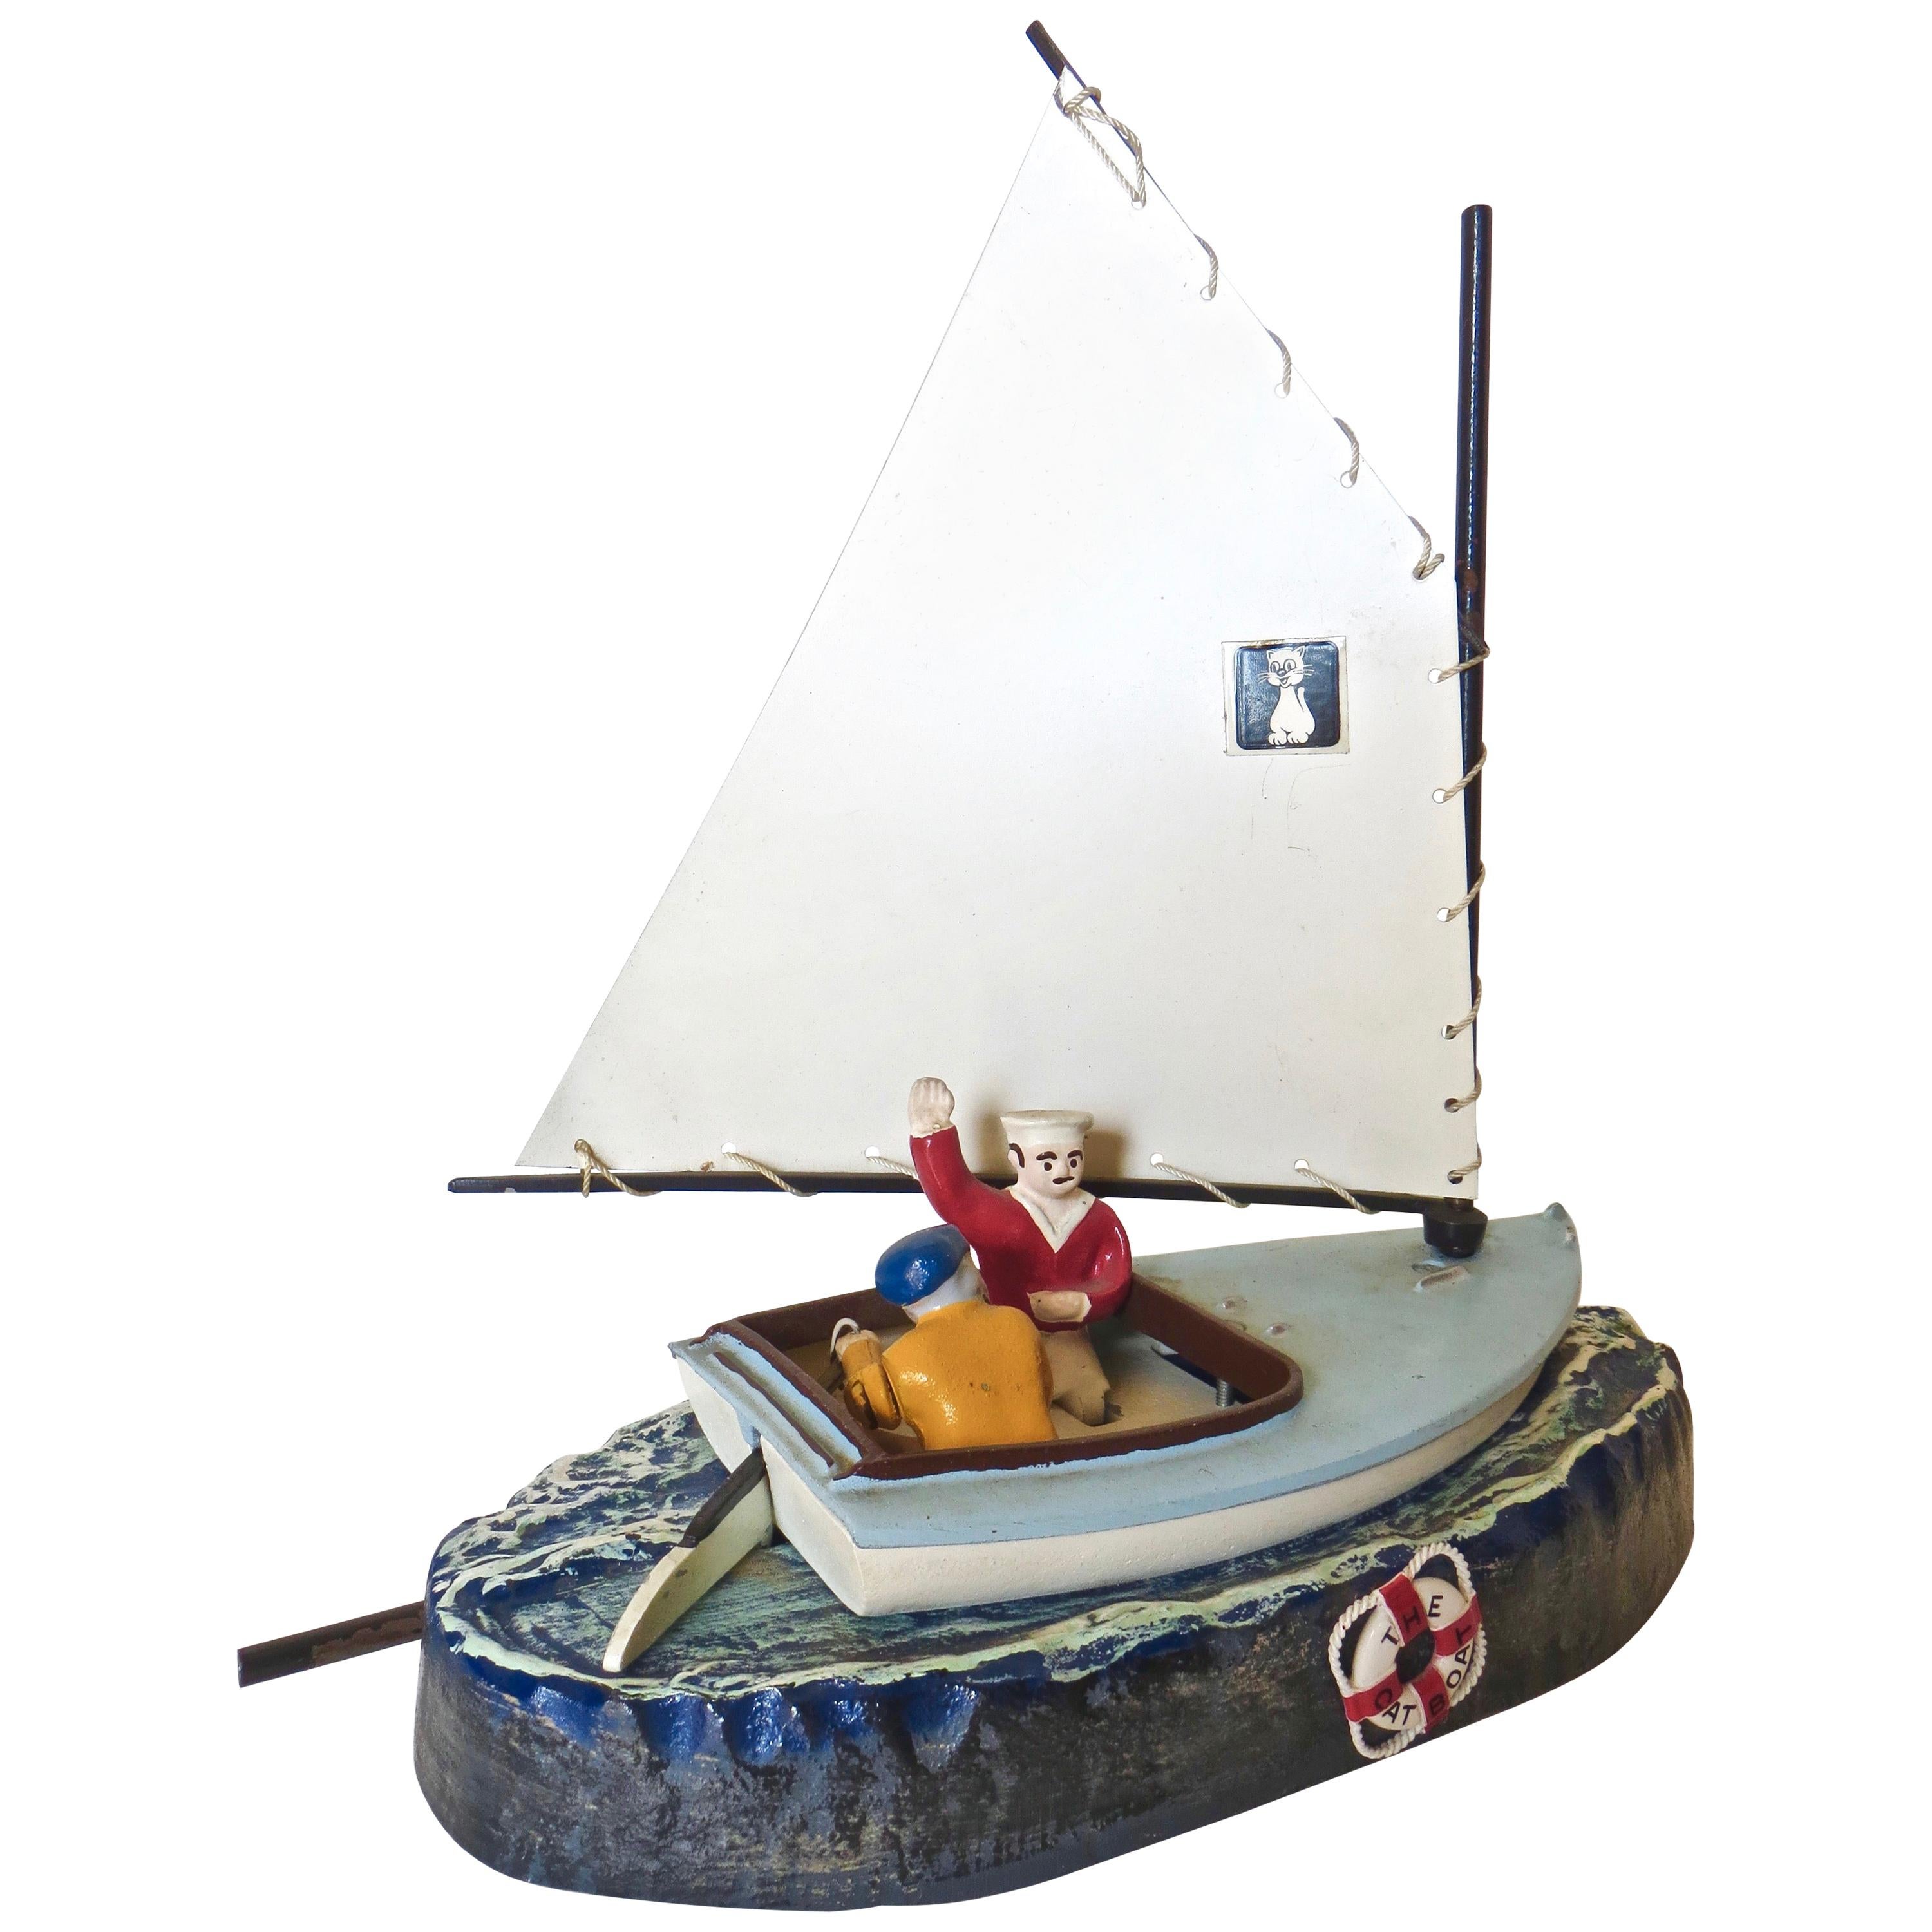 "Cat Boat" Mechanical Toy Penny Bank, American, circa 1968